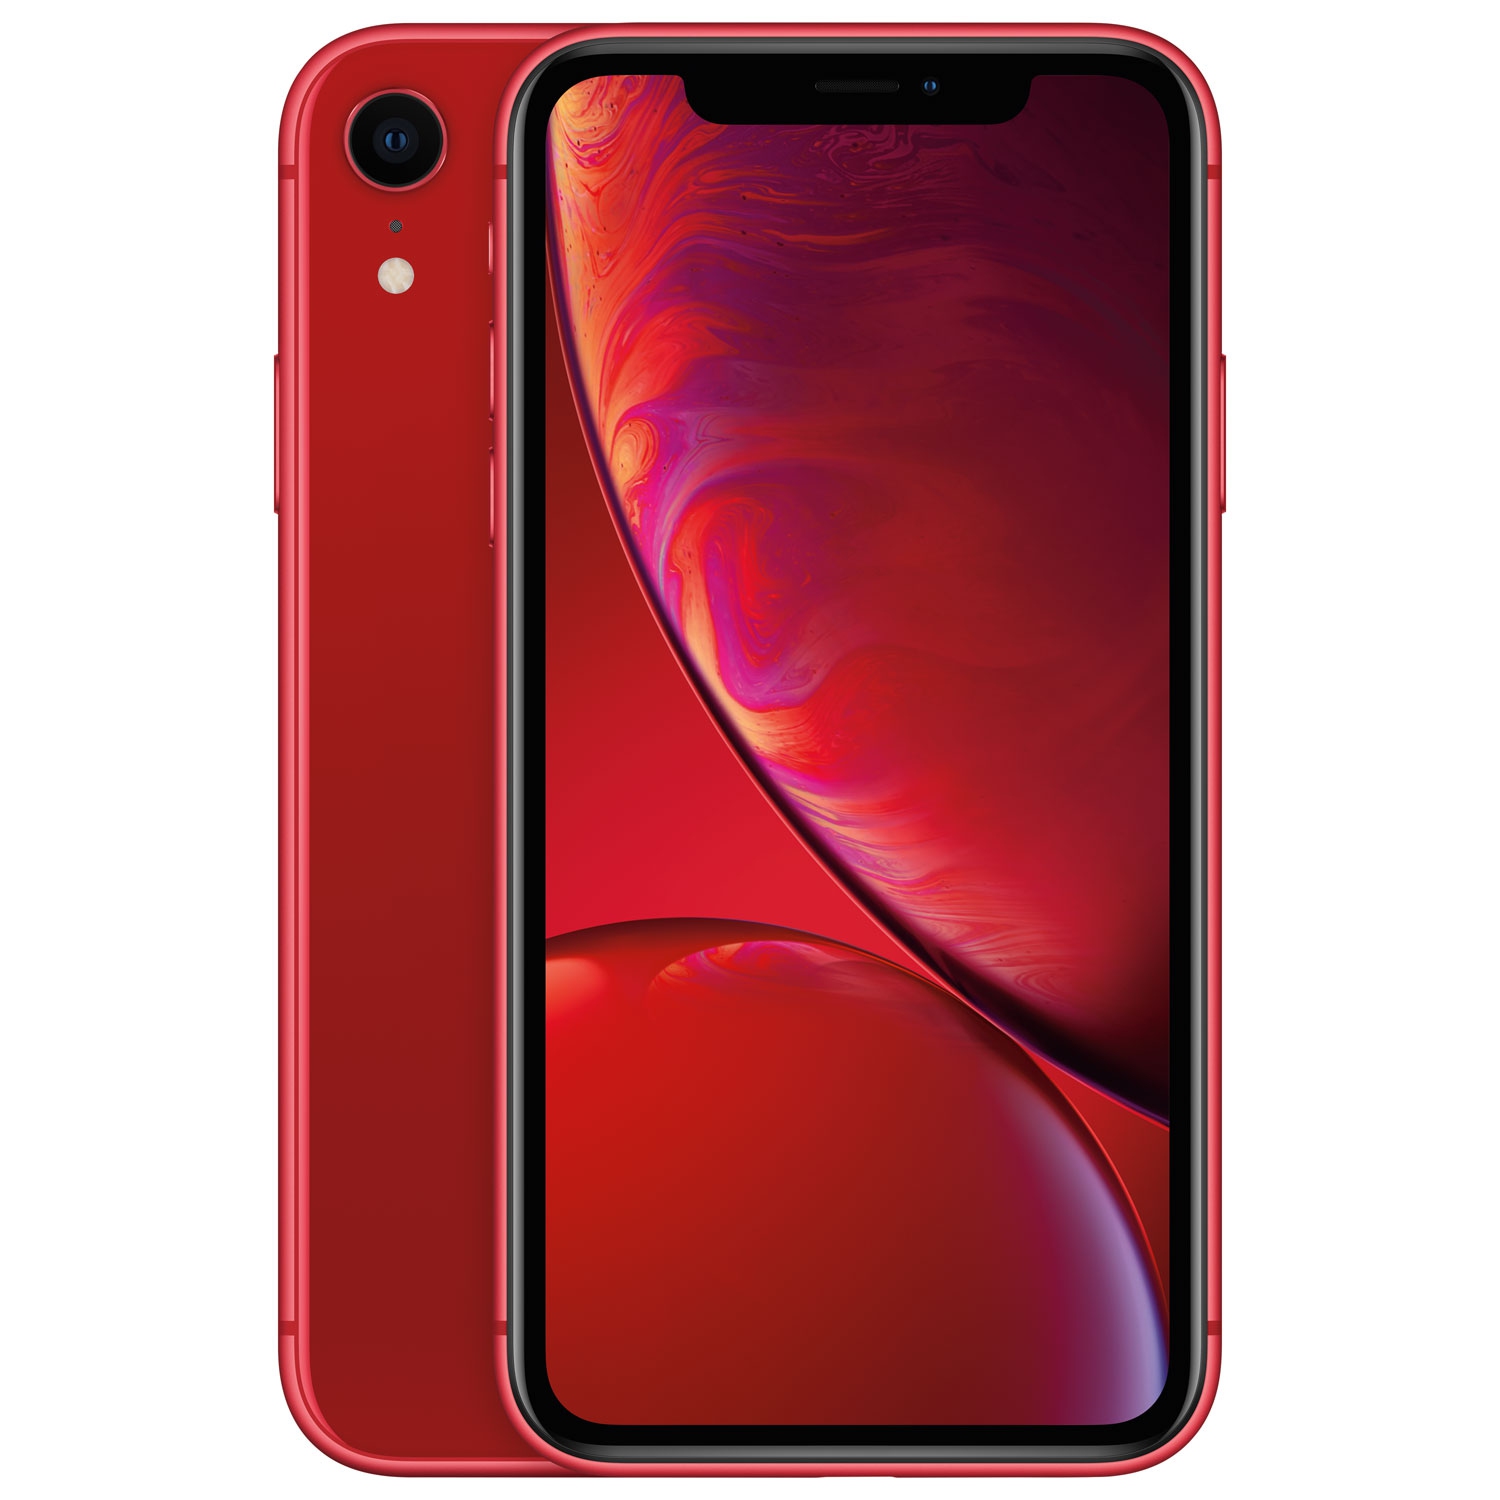 Refurbished (Good) - Apple iPhone XR 128GB Smartphone - (Product)RED - Unlocked